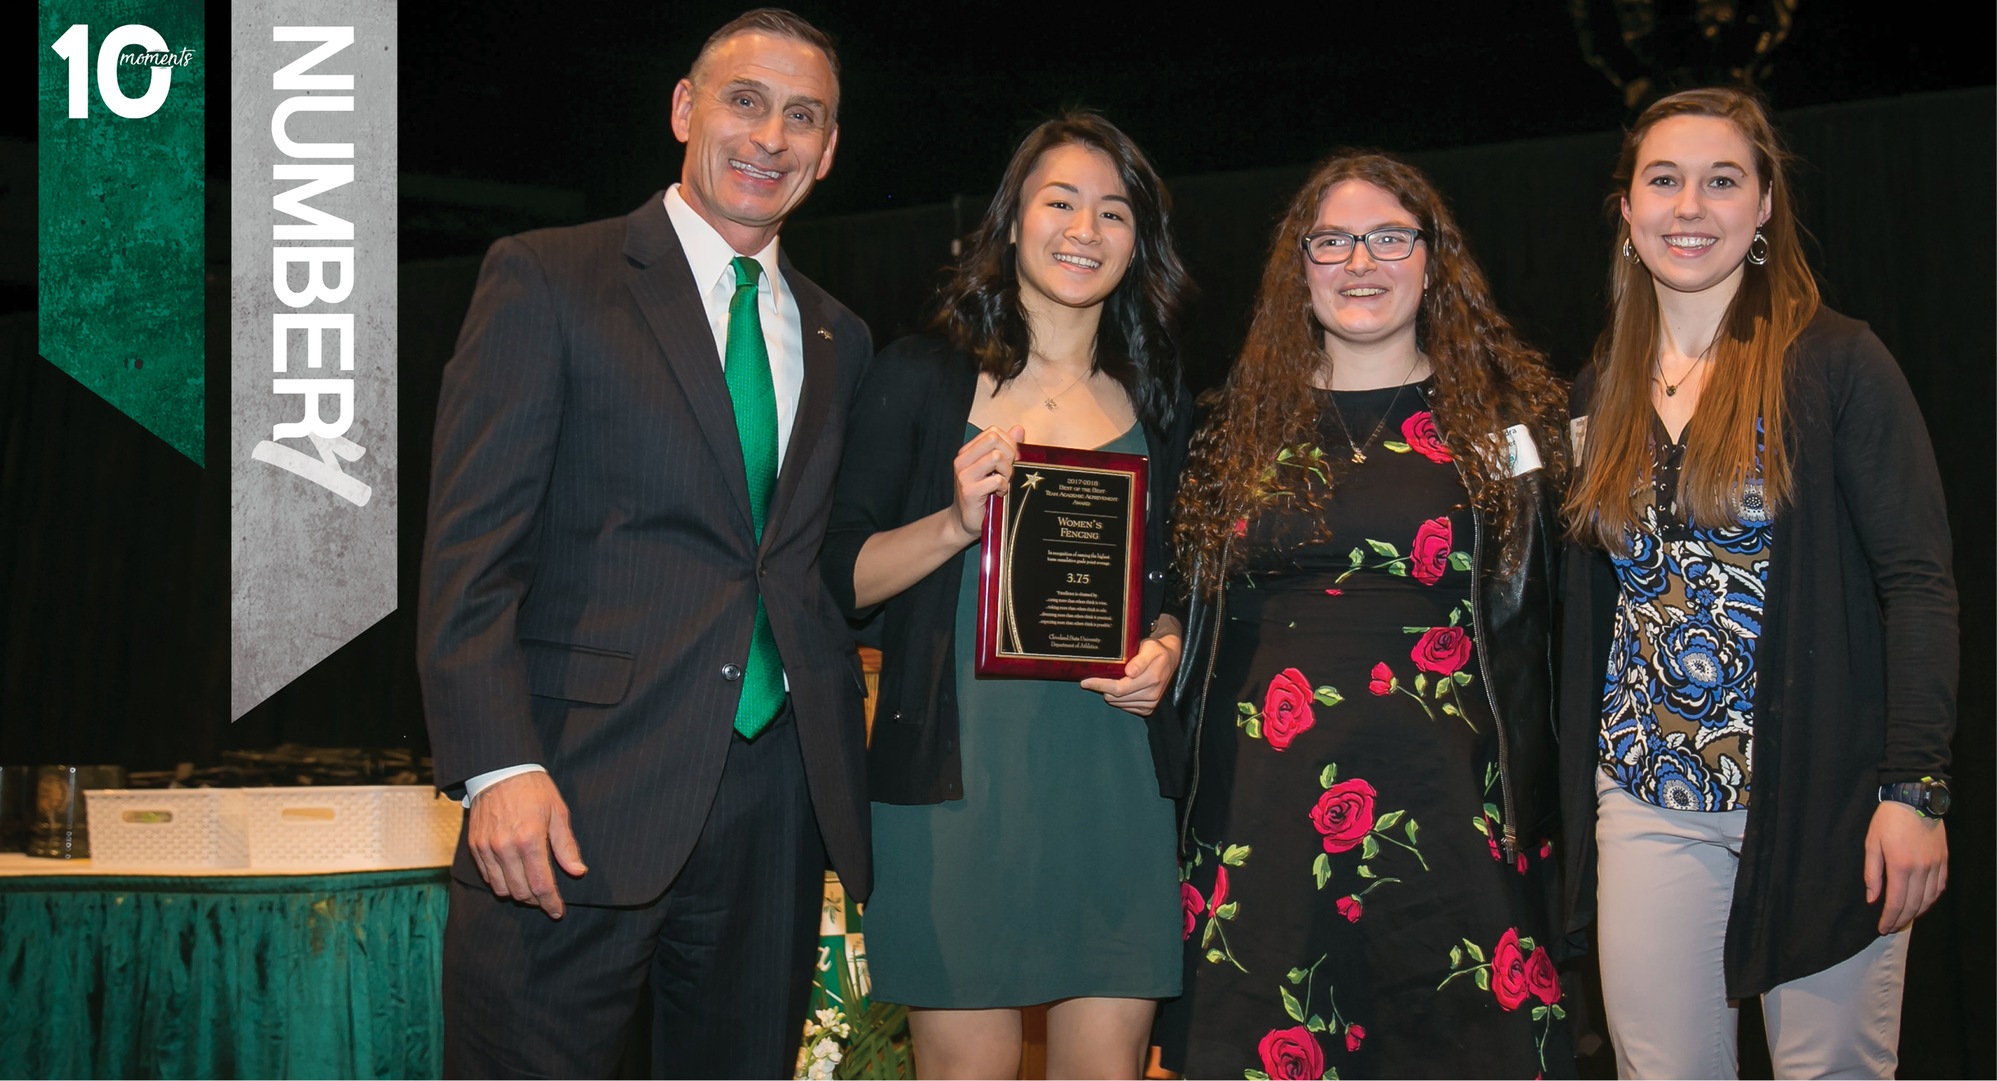 2017-18 CSU Athletics Top 10 Moments | #4 - Record Number Honored at John Konstantinos Academic Honors Luncheon